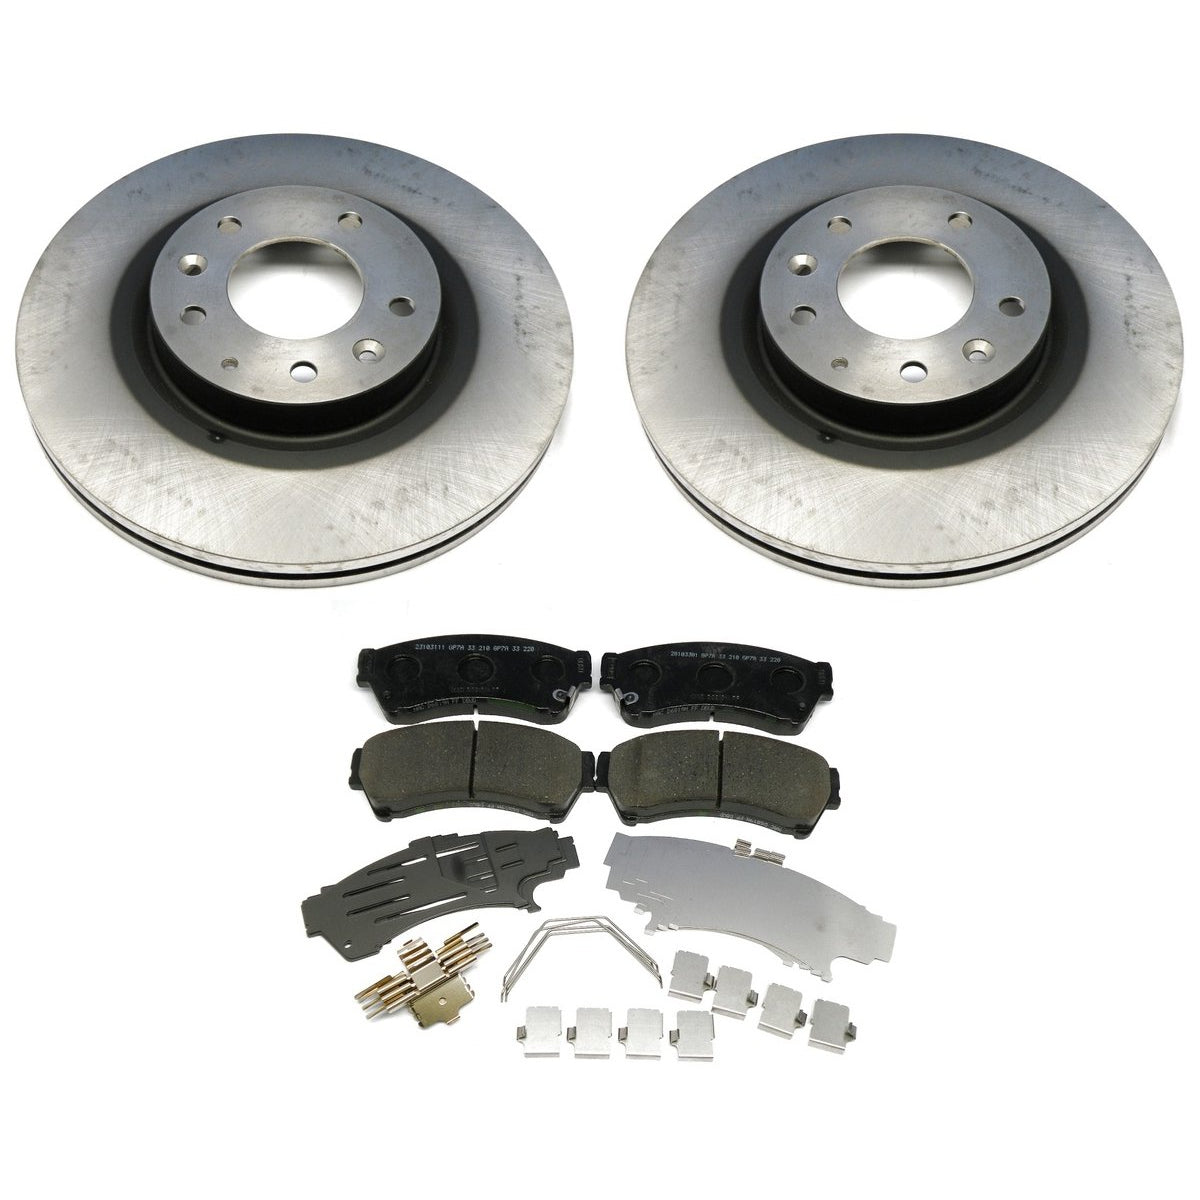 Front Brake Package: Pads, Rotors &amp; Attachment Kit | Mazda6 (2003-2005)